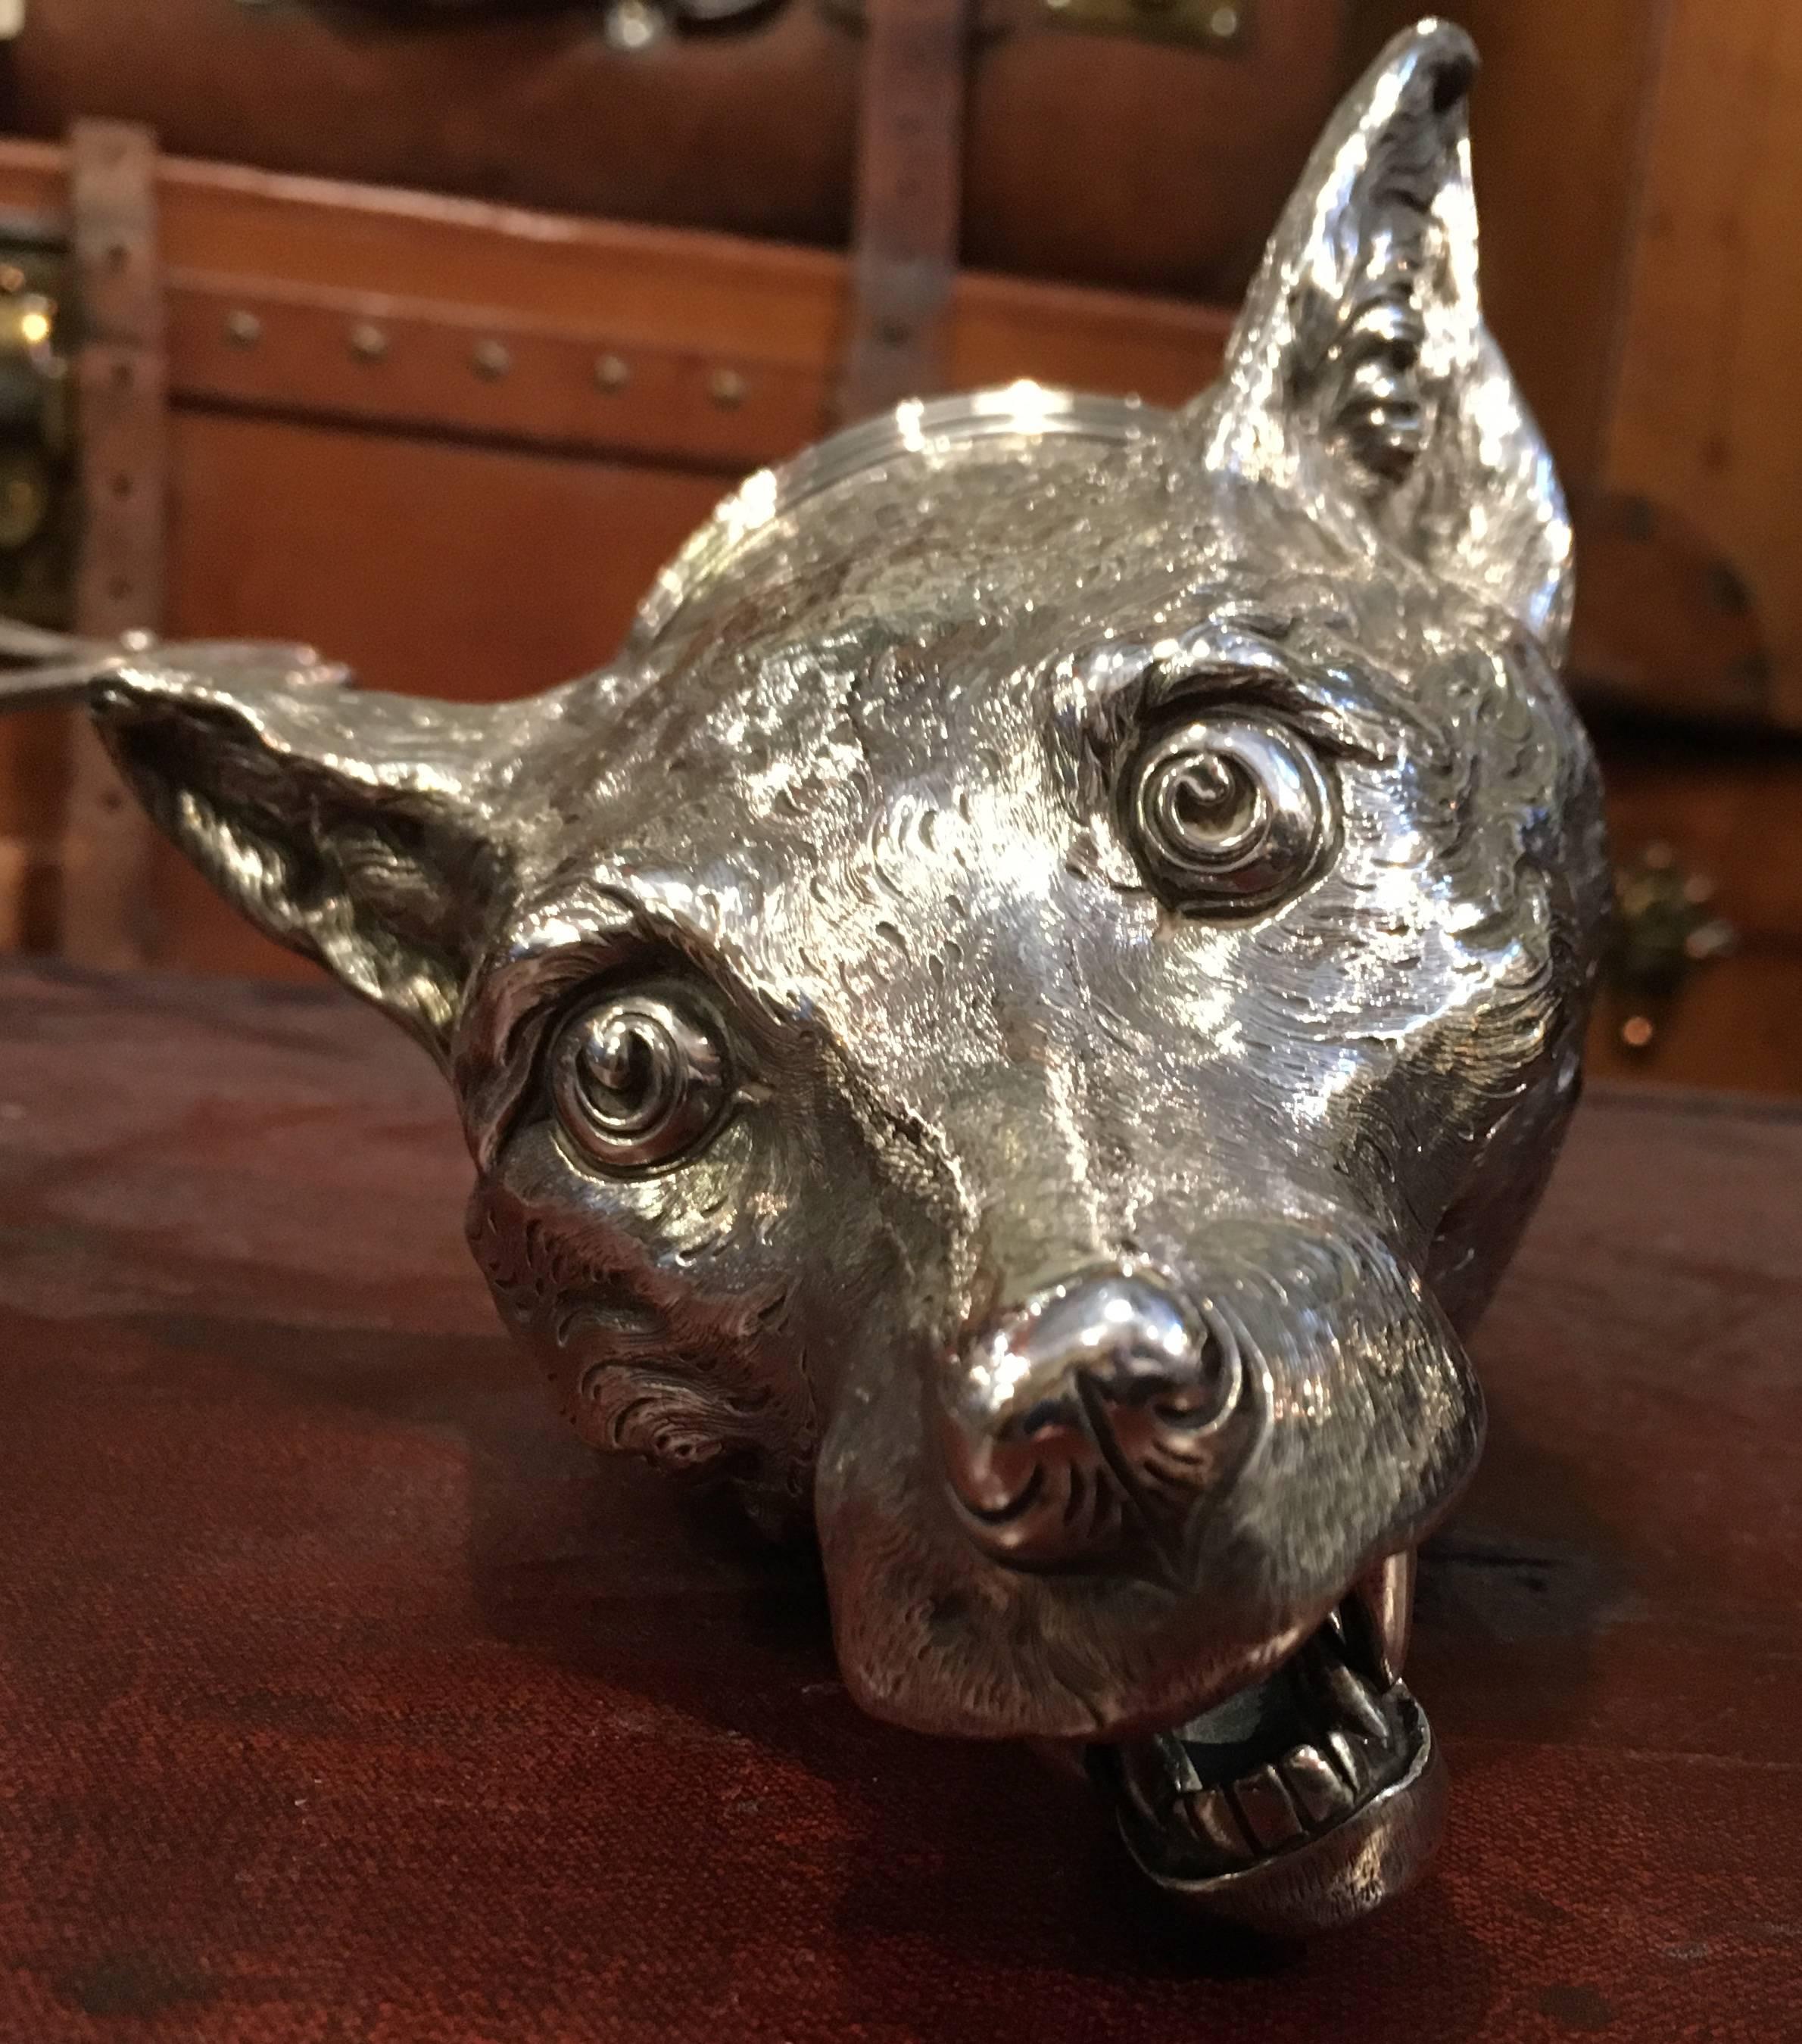 An extremely large sterling silver fox stirrup cup. Dated for London 1901 and retailed by Oultner and Houle of St James.

The stirrup cup stands a very impressive 7 inches high and the opening has a 4 inch diameter.

The interior lip bears and